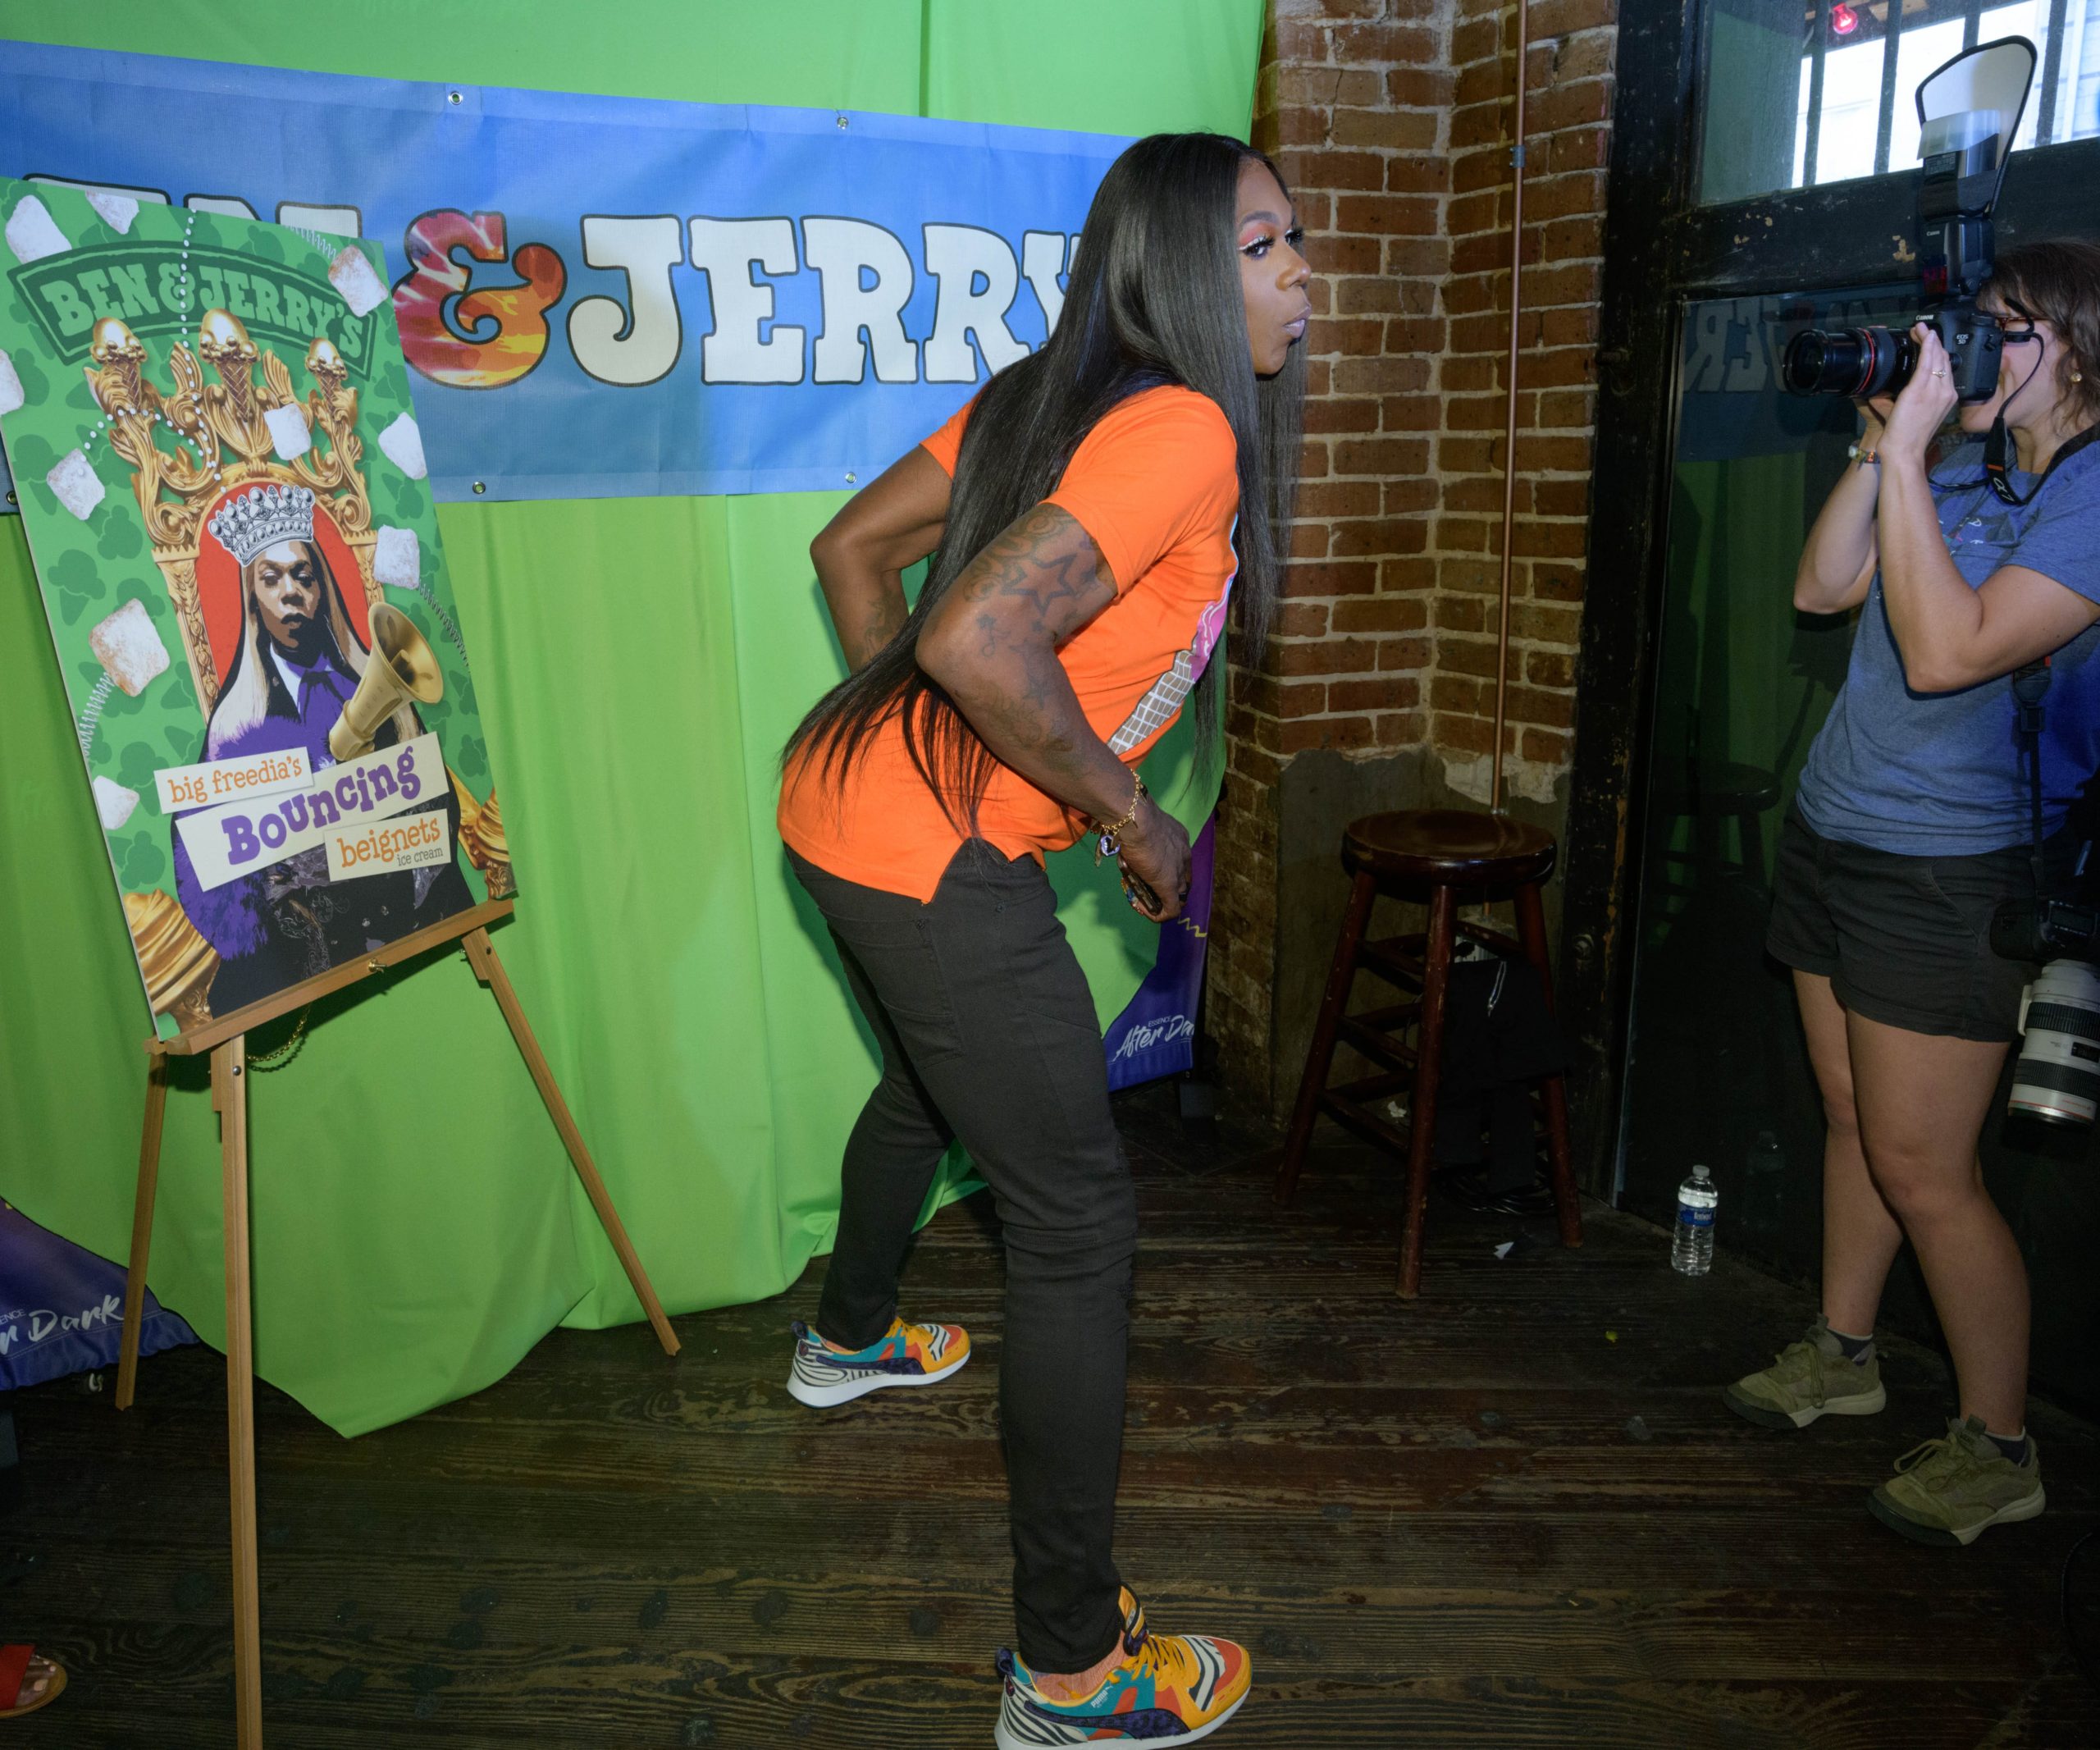 Ben and Jerry’s Ice Cream teams up with the Queen of Bounce, Big Freedia for a day of music, food, and free ice cream at the Republic NOLA event space Saturday July 6, 2019 during the Essence Festival in New Orleans. Ben and Jerry’s announced a new partnership with Freedia with the promotional flavor ‘Big Freedia’s Bouncing Beignets Ice Cream’ during a benefit for local non-profits including No Kid Hungry LA, Liberty’s Kitchen, and Upturn Arts. Attendees got an exclusive first listen of new Big Freedia track, ChasingRainbows. The Queen Diva was on hand to dance and tell her story about her life in New Orleans. Photo by Matthew Hinton